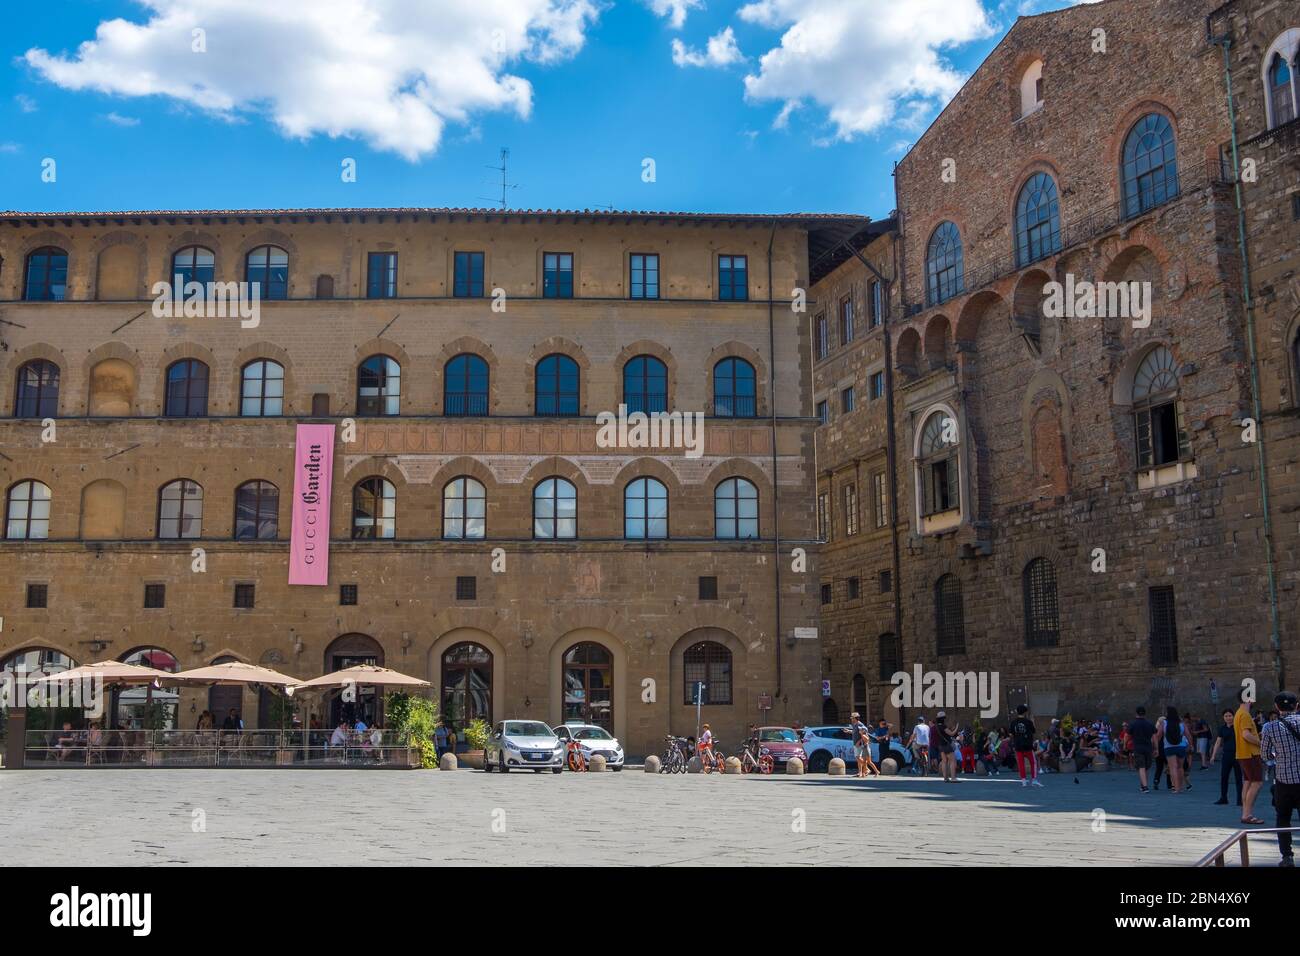 Florence, Italy - August 16, 2019: Piazza della Signoria is a historic town square with numerous cafes, restaurants and tourists in Florence Stock Photo